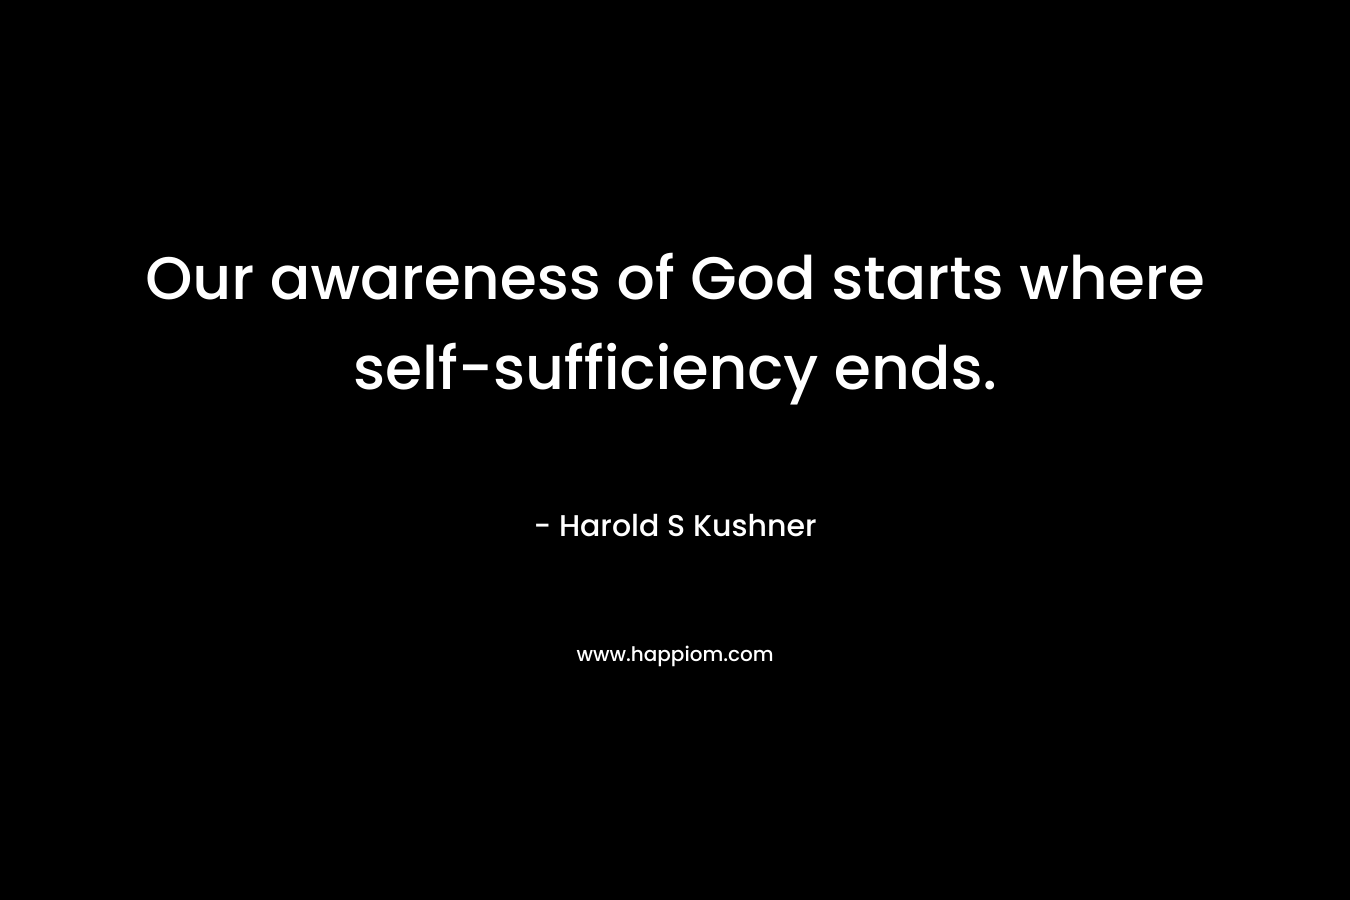 Our awareness of God starts where self-sufficiency ends. – Harold S Kushner